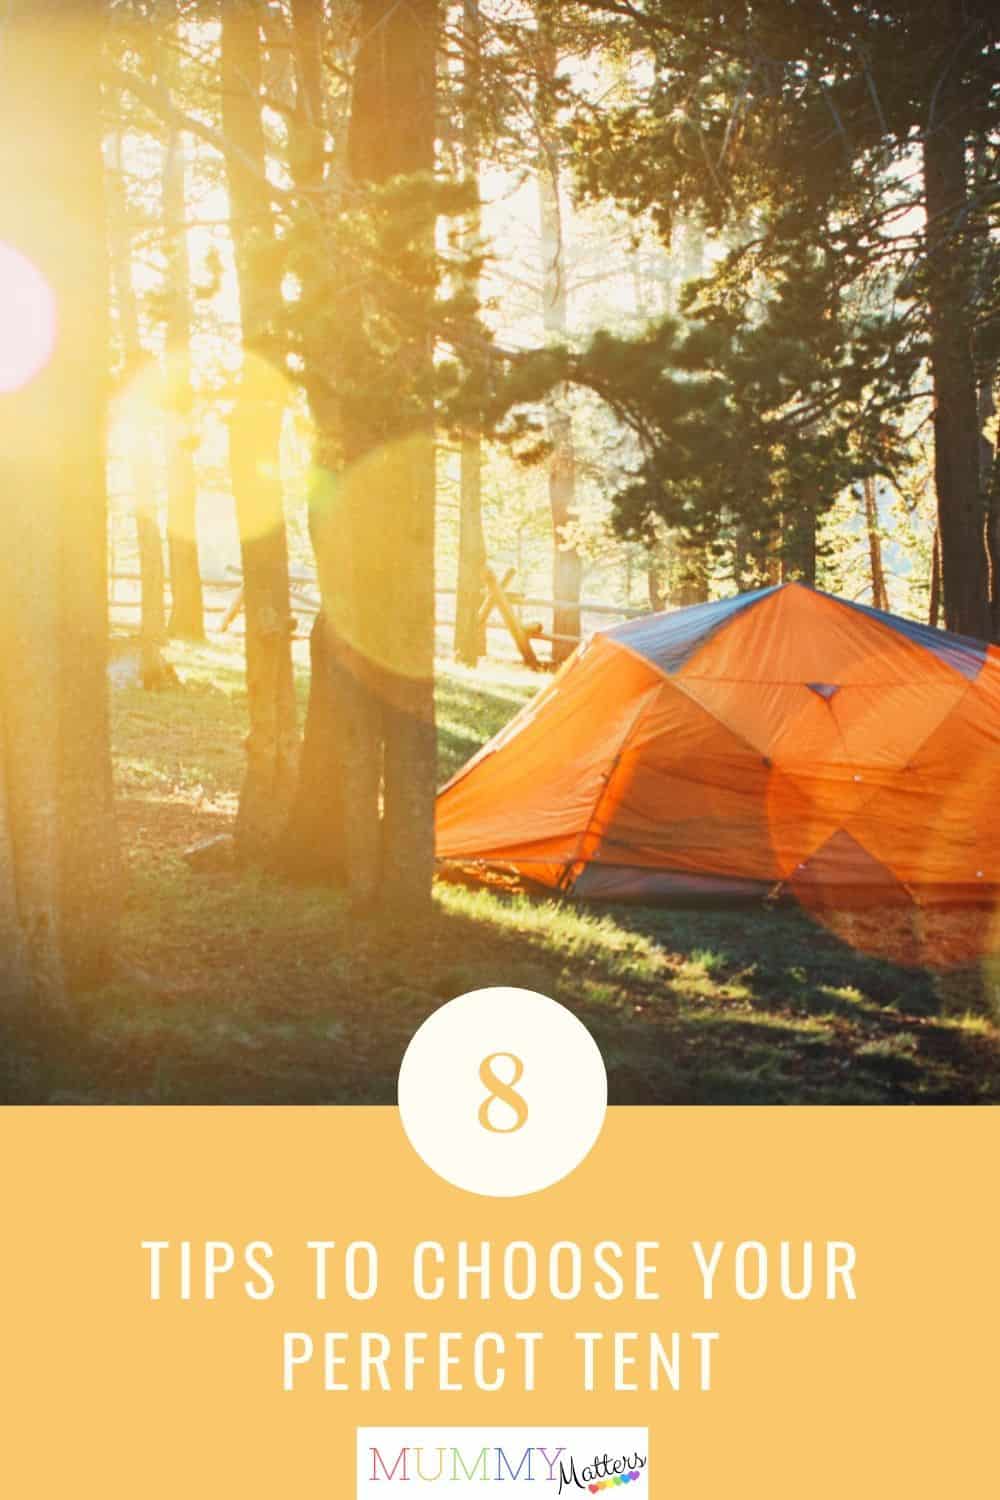 If you have decided to give camping a go then it's time to choose a tent. Finding the correct size can mean the success or failure of a camping trip.